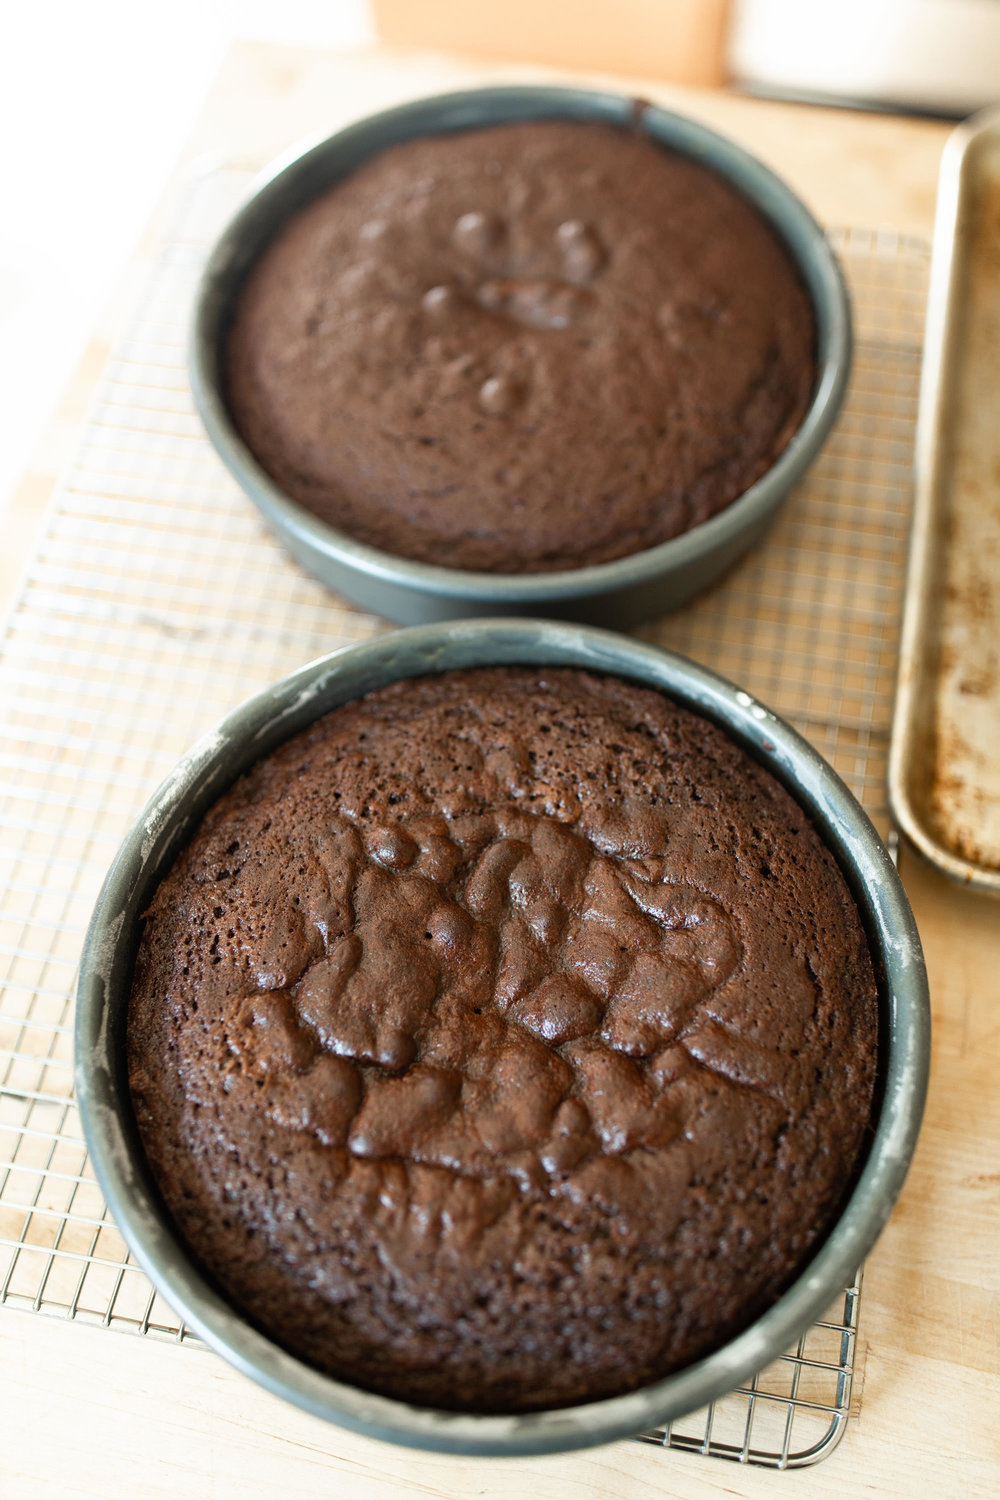 Chocolate Cakes Coming Out Of The Oven